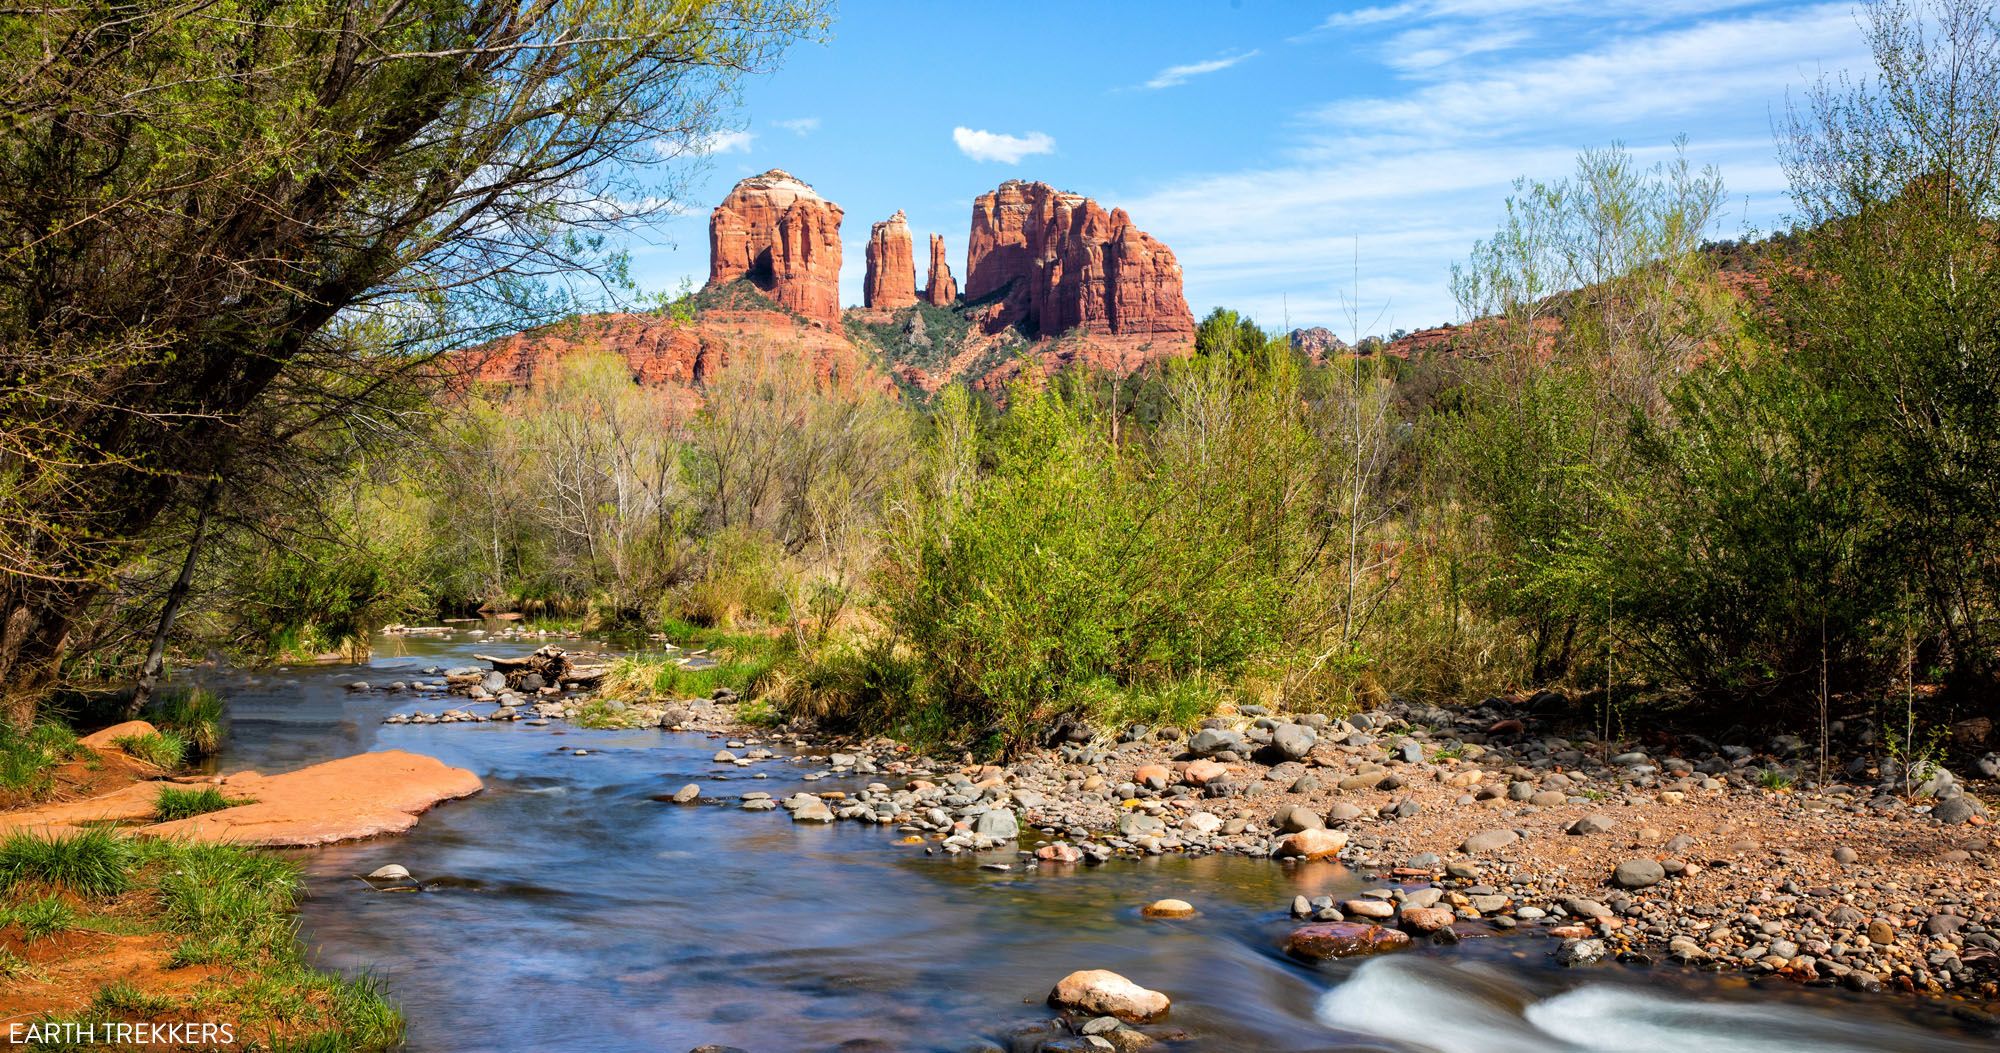 Featured image for “How to Photograph Cathedral Rock from the Crescent Moon Picnic Site”